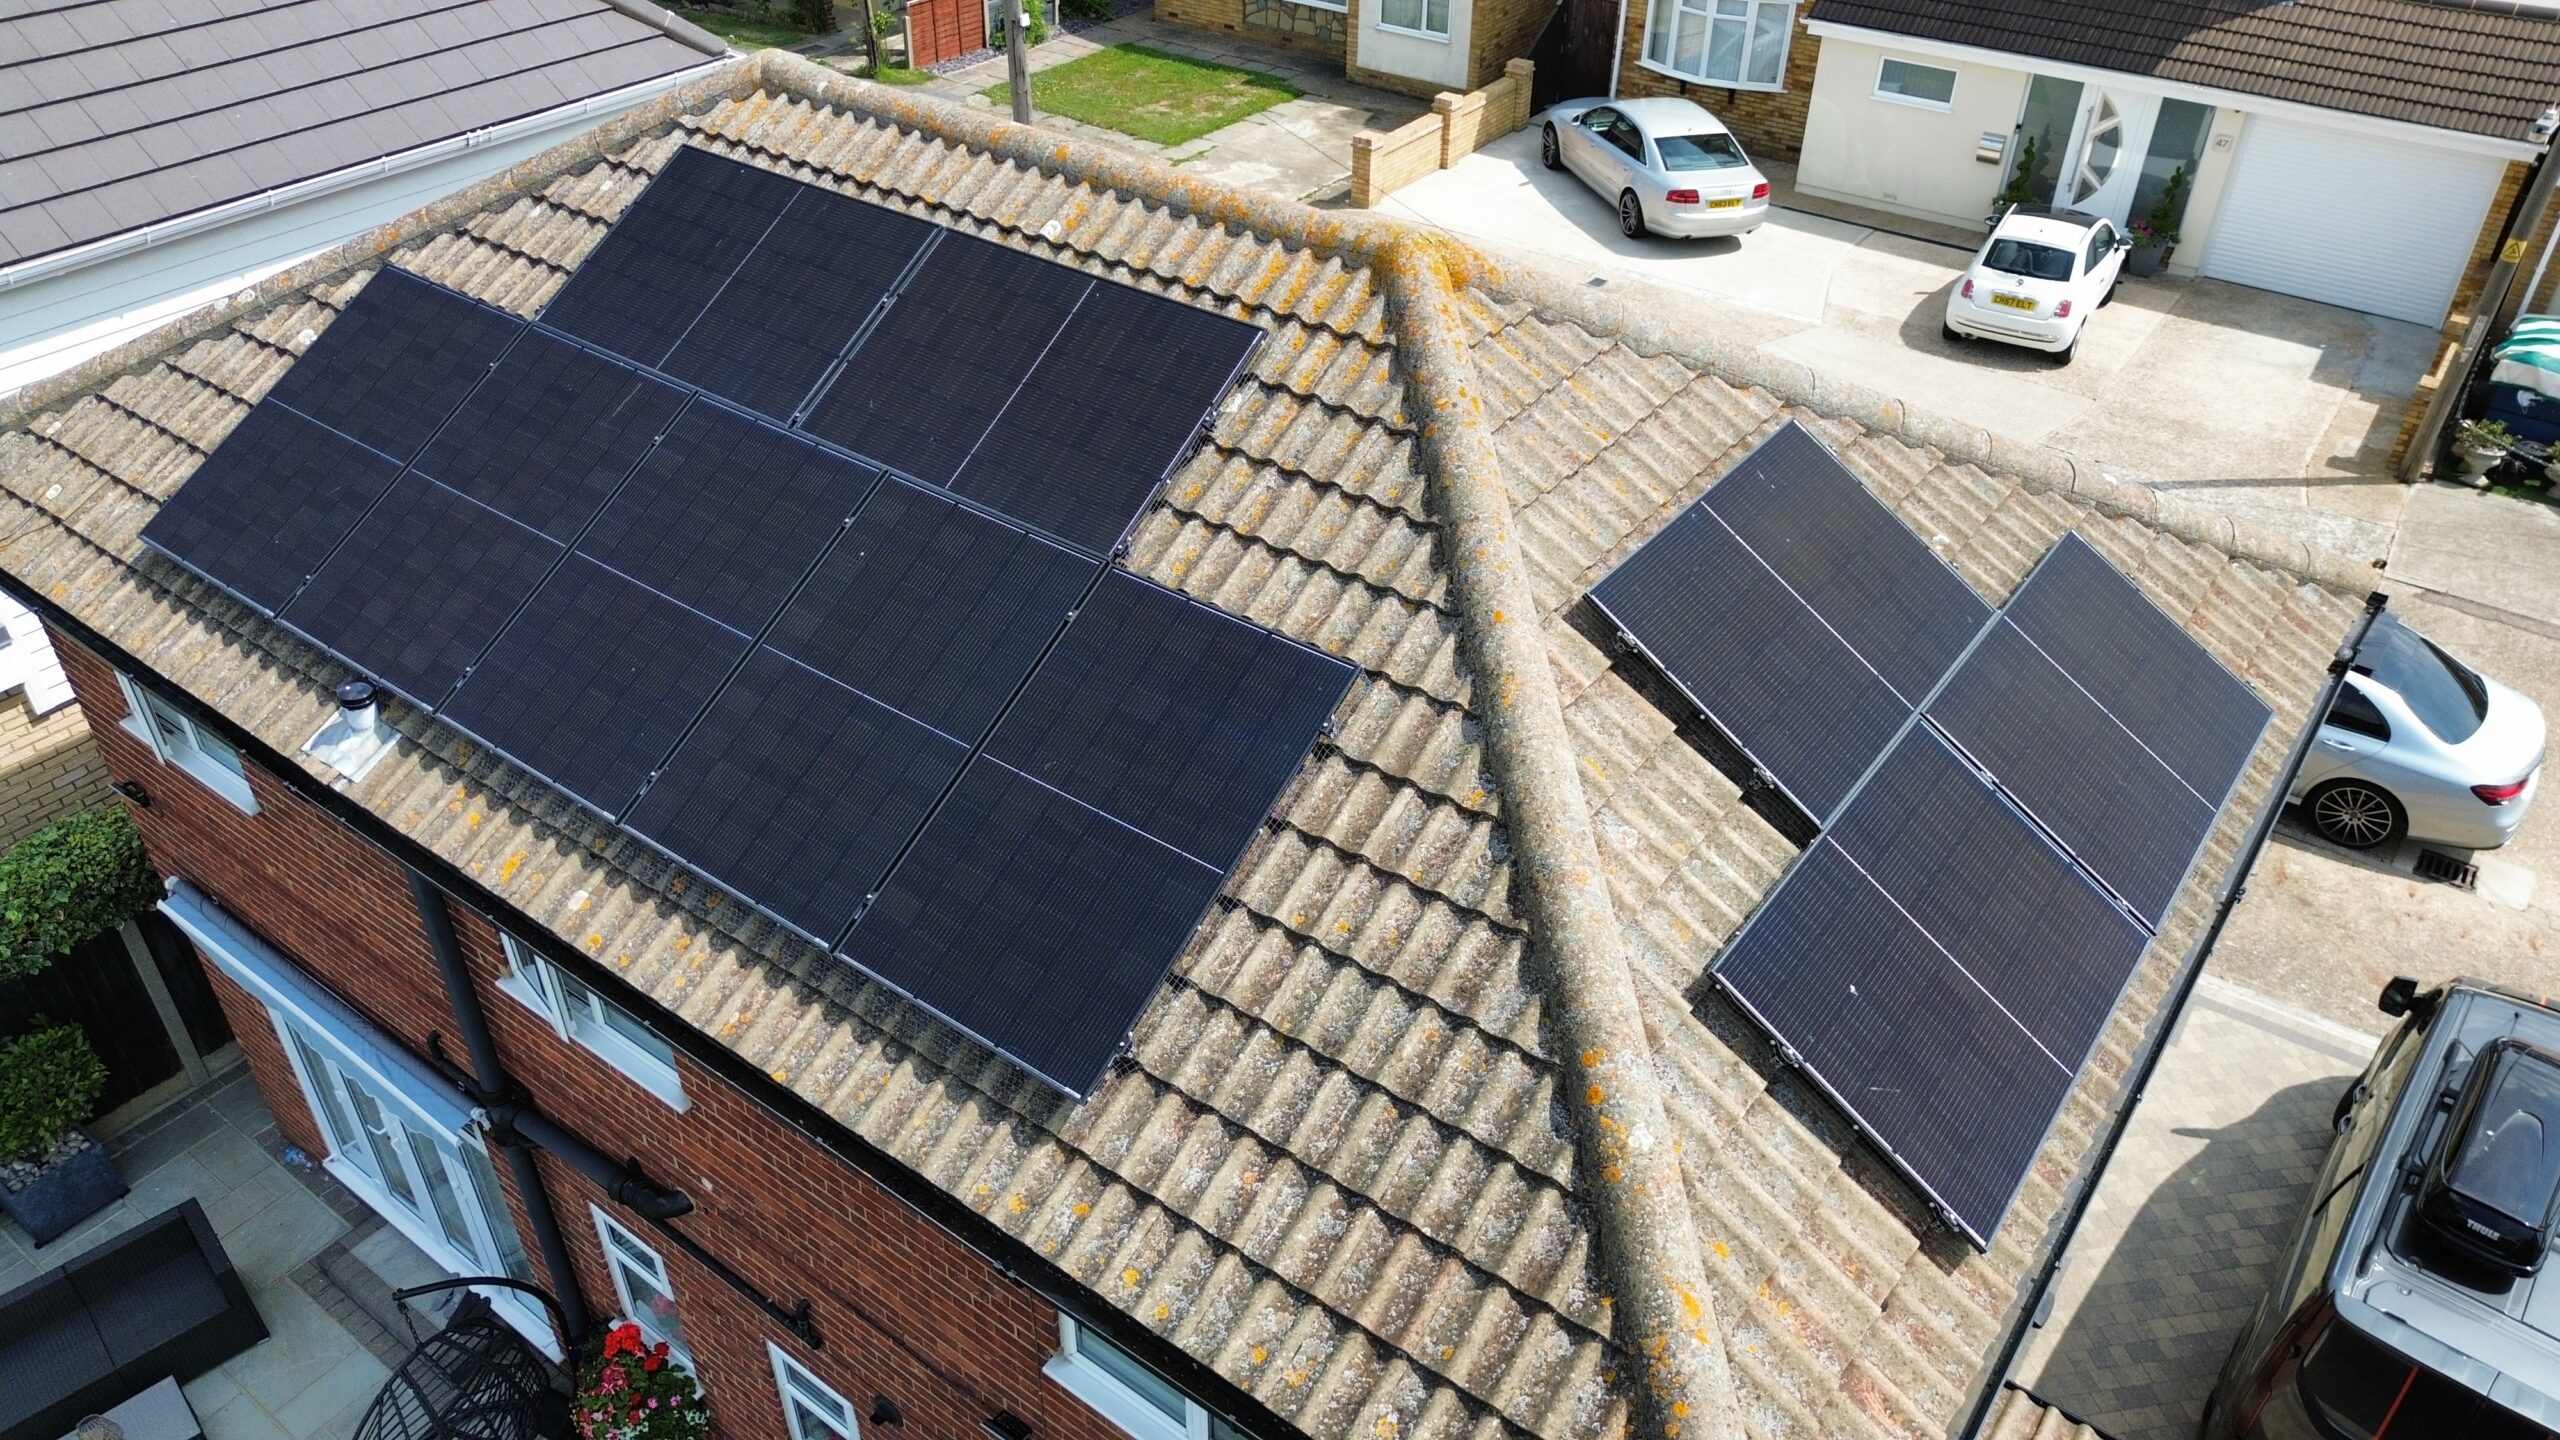 Solar panels roof mounted on a detached house